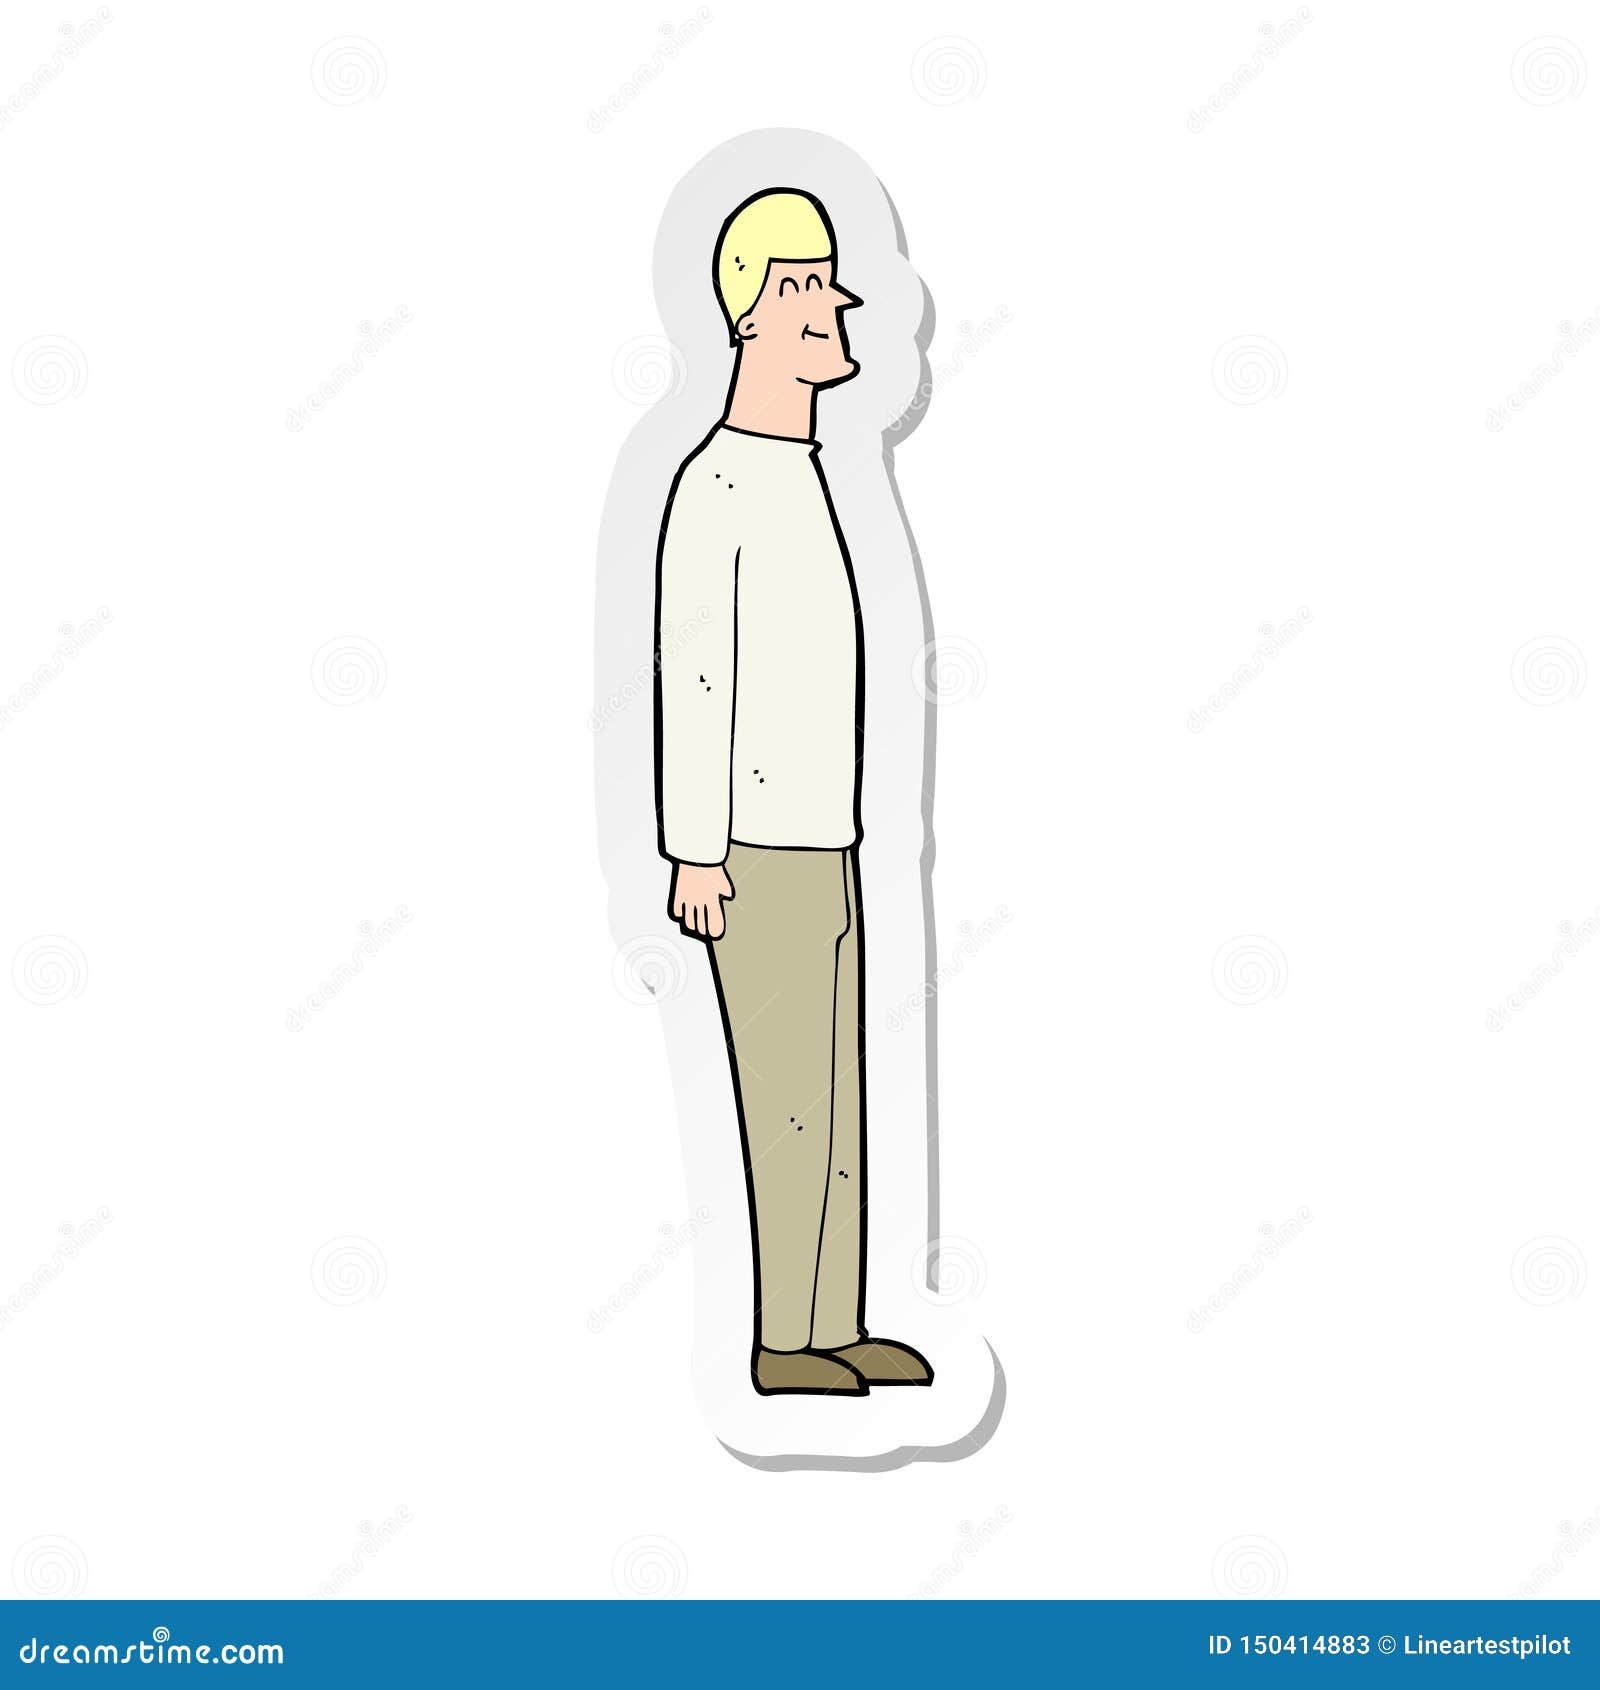 Sticker of a Cartoon Tall Man Stock Vector - Illustration of quirky, hand:  150414883